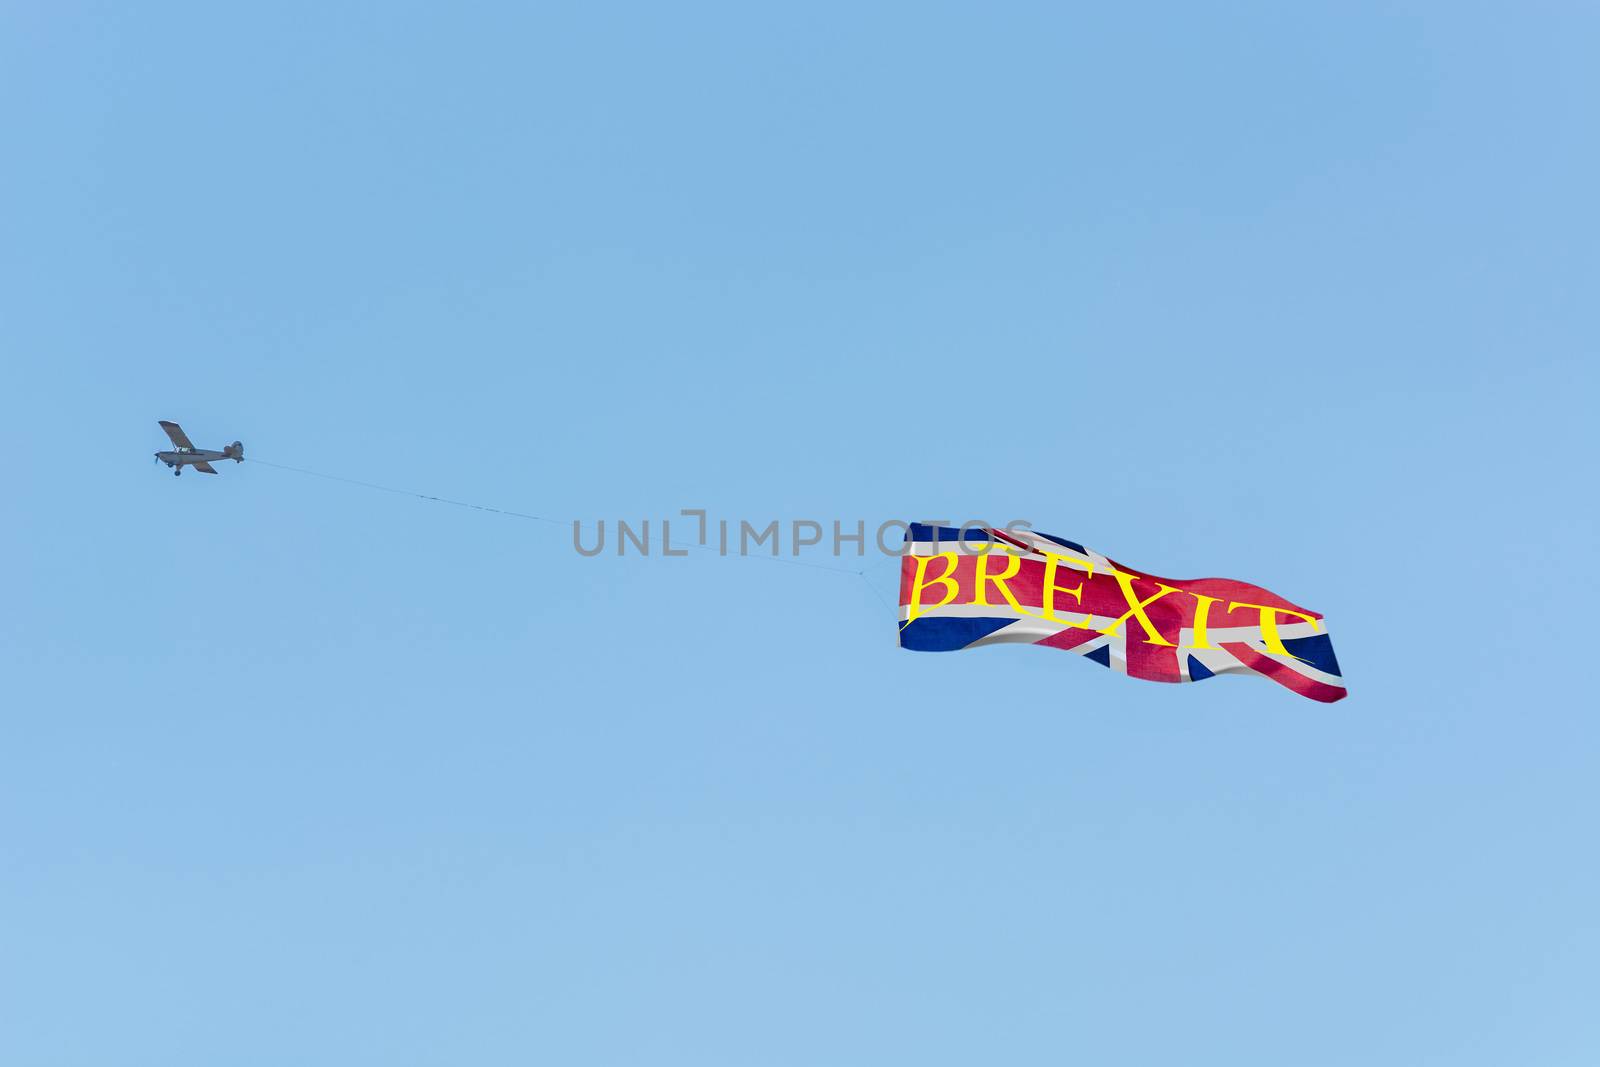 

Banner towing, small engine aircraft towing banners for advertising.
Here the flag of Great Britain with text Proposed referendum on United Kingdom membership of the European Union.